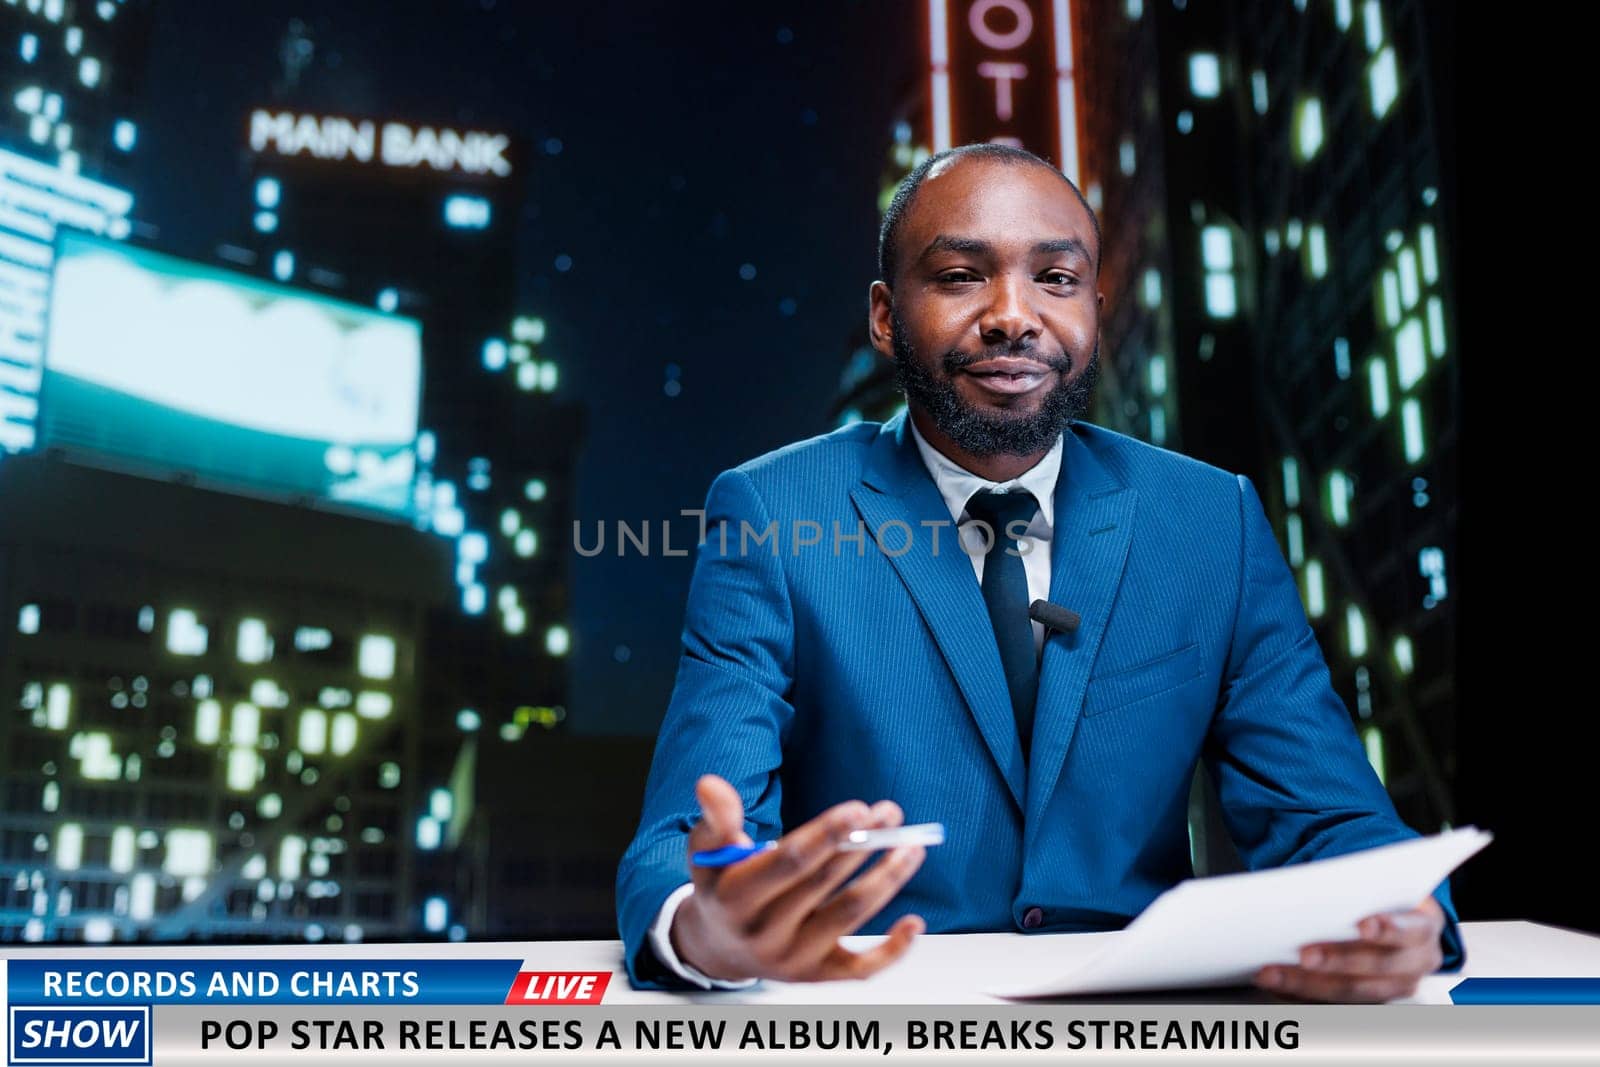 Reporter talks about new music launch, presenting successful pop star album breaking the top charts and streaming records. Night show host covering media and entertainment segment.